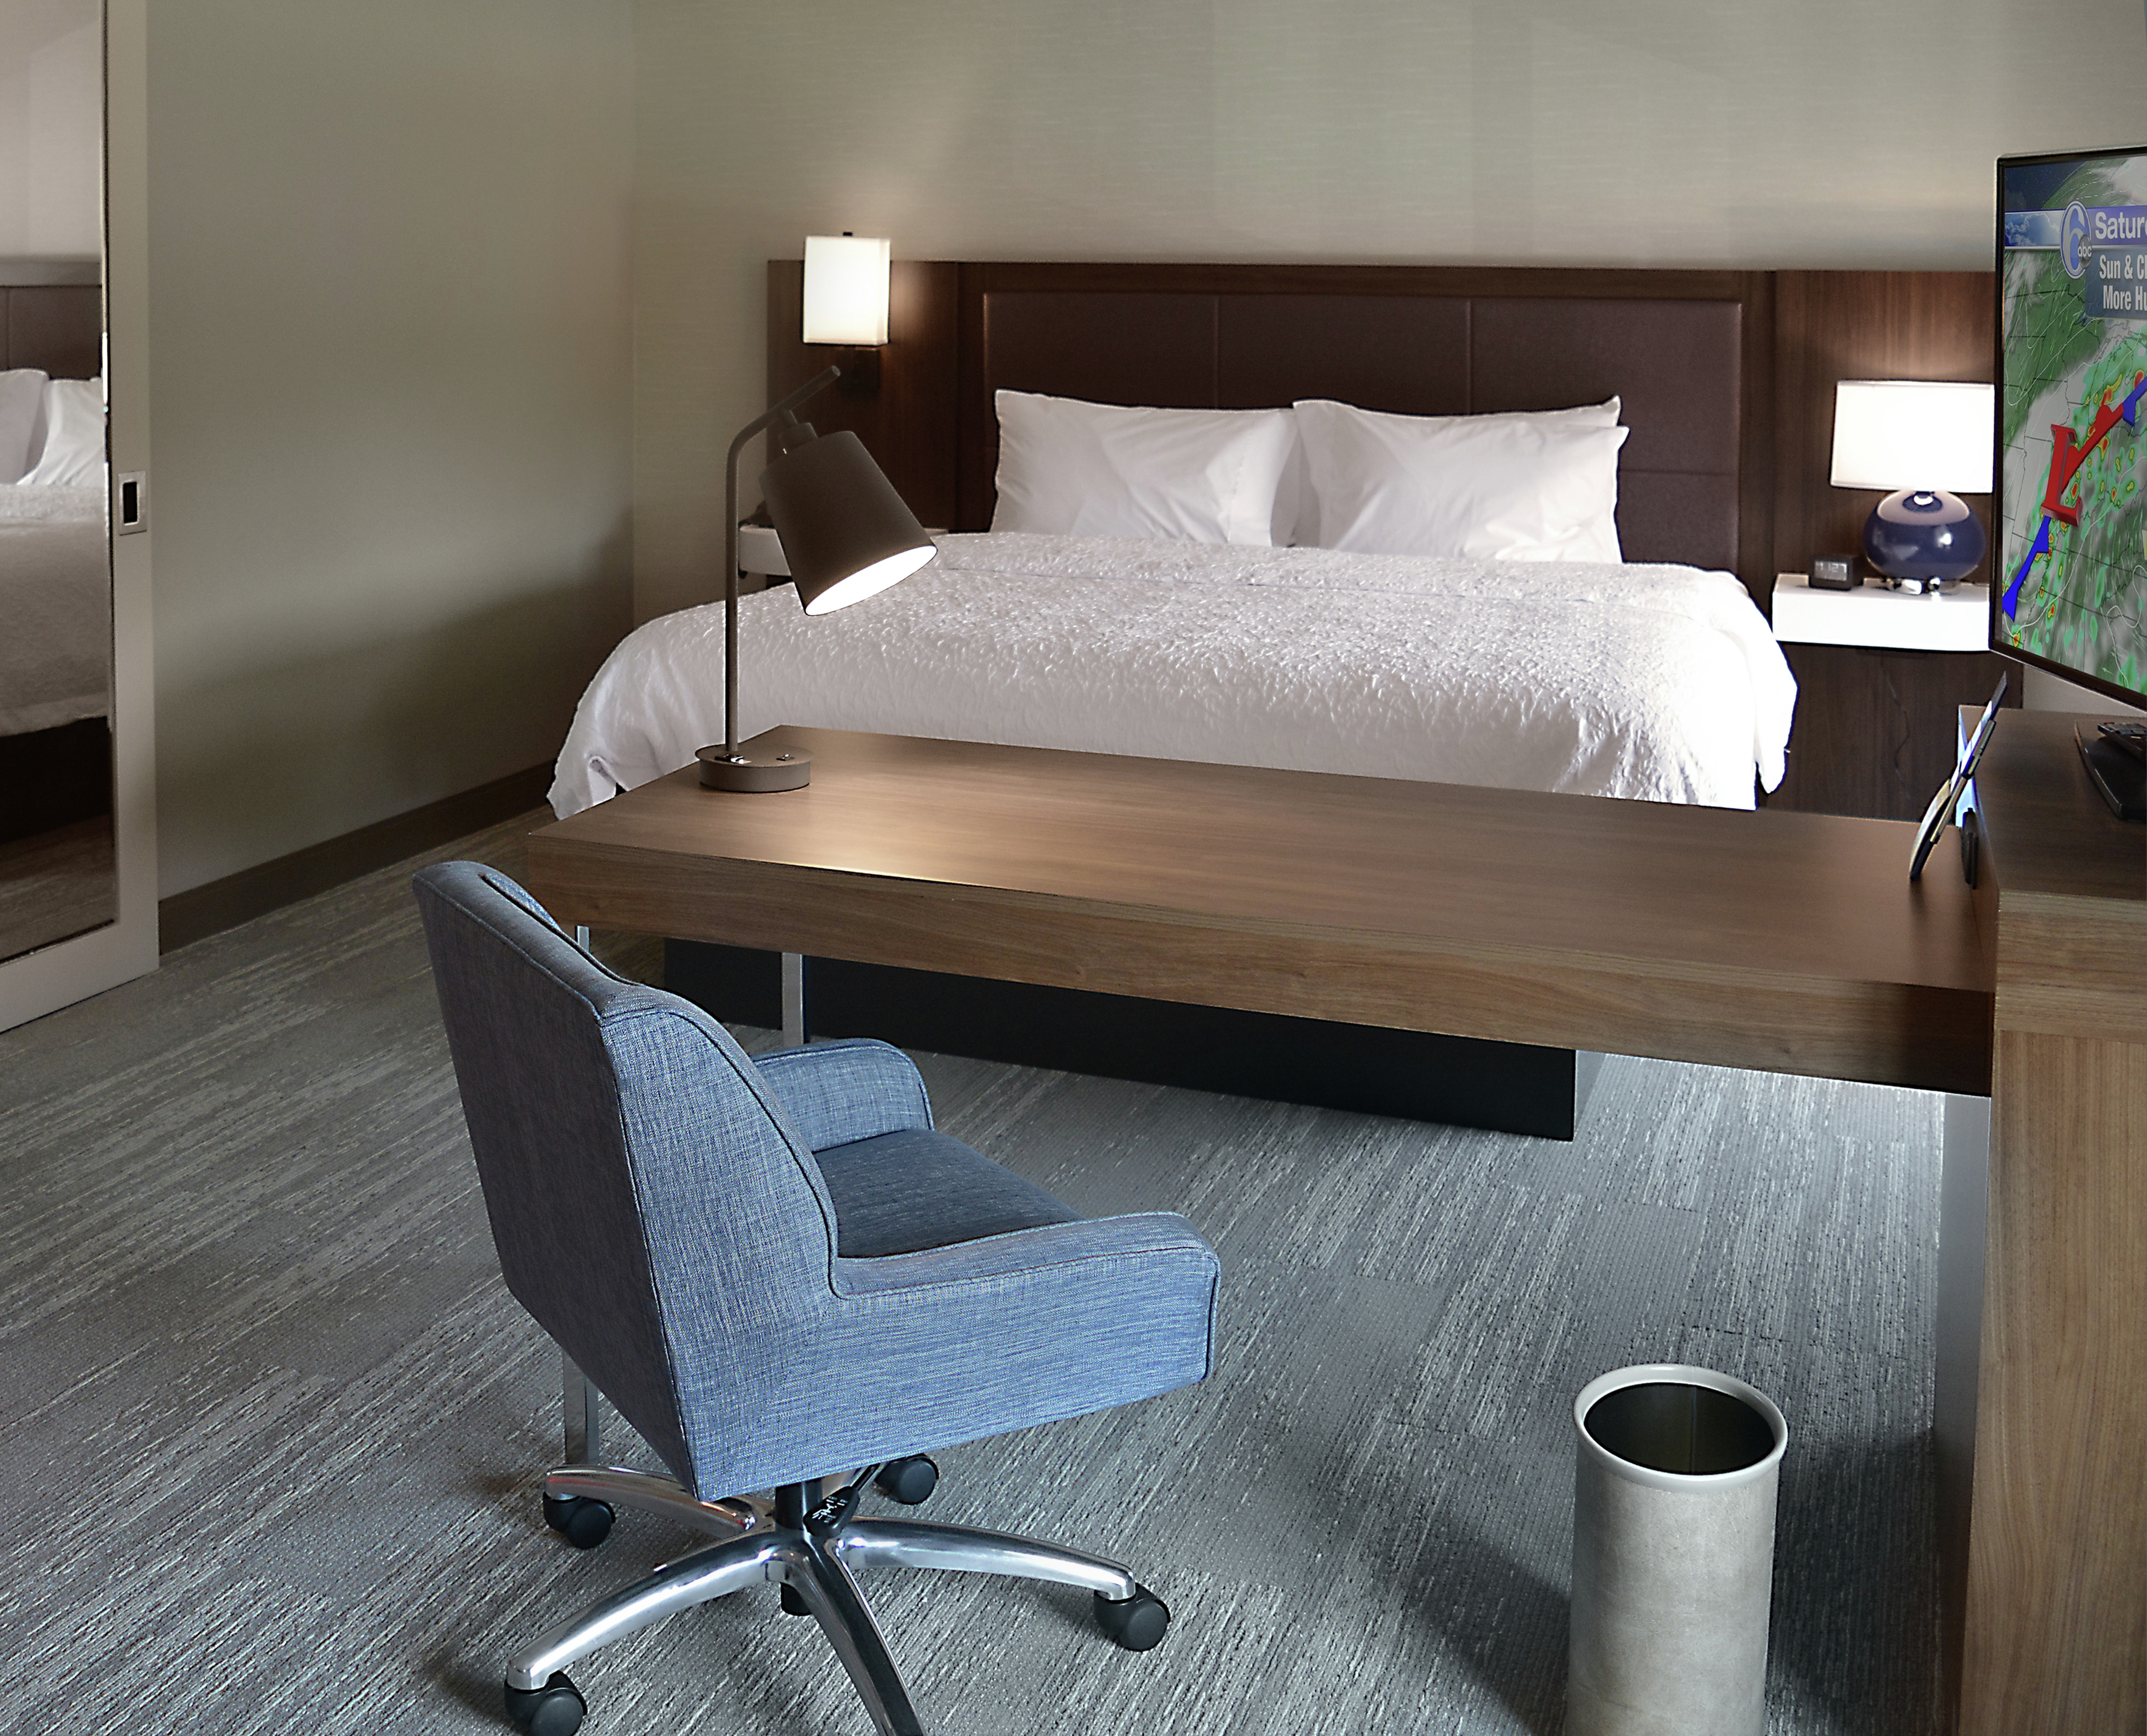 Guest Suite with Bed, Television and Work Desk